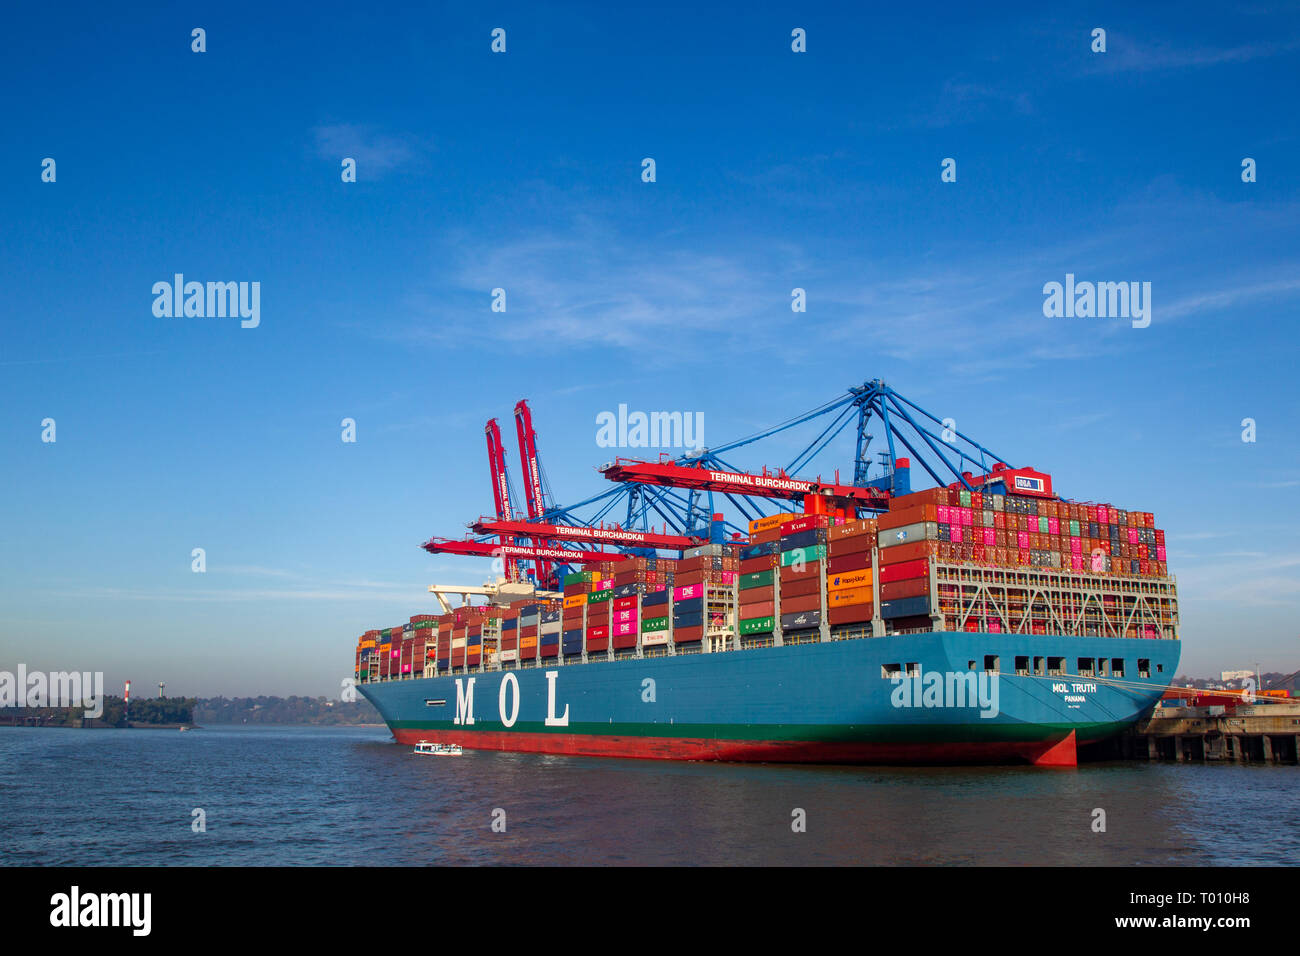 The MOL Truth, one of the biggest container ships of the world, at Burchardkai in the harbour of Hamburg, Germany. Stock Photo